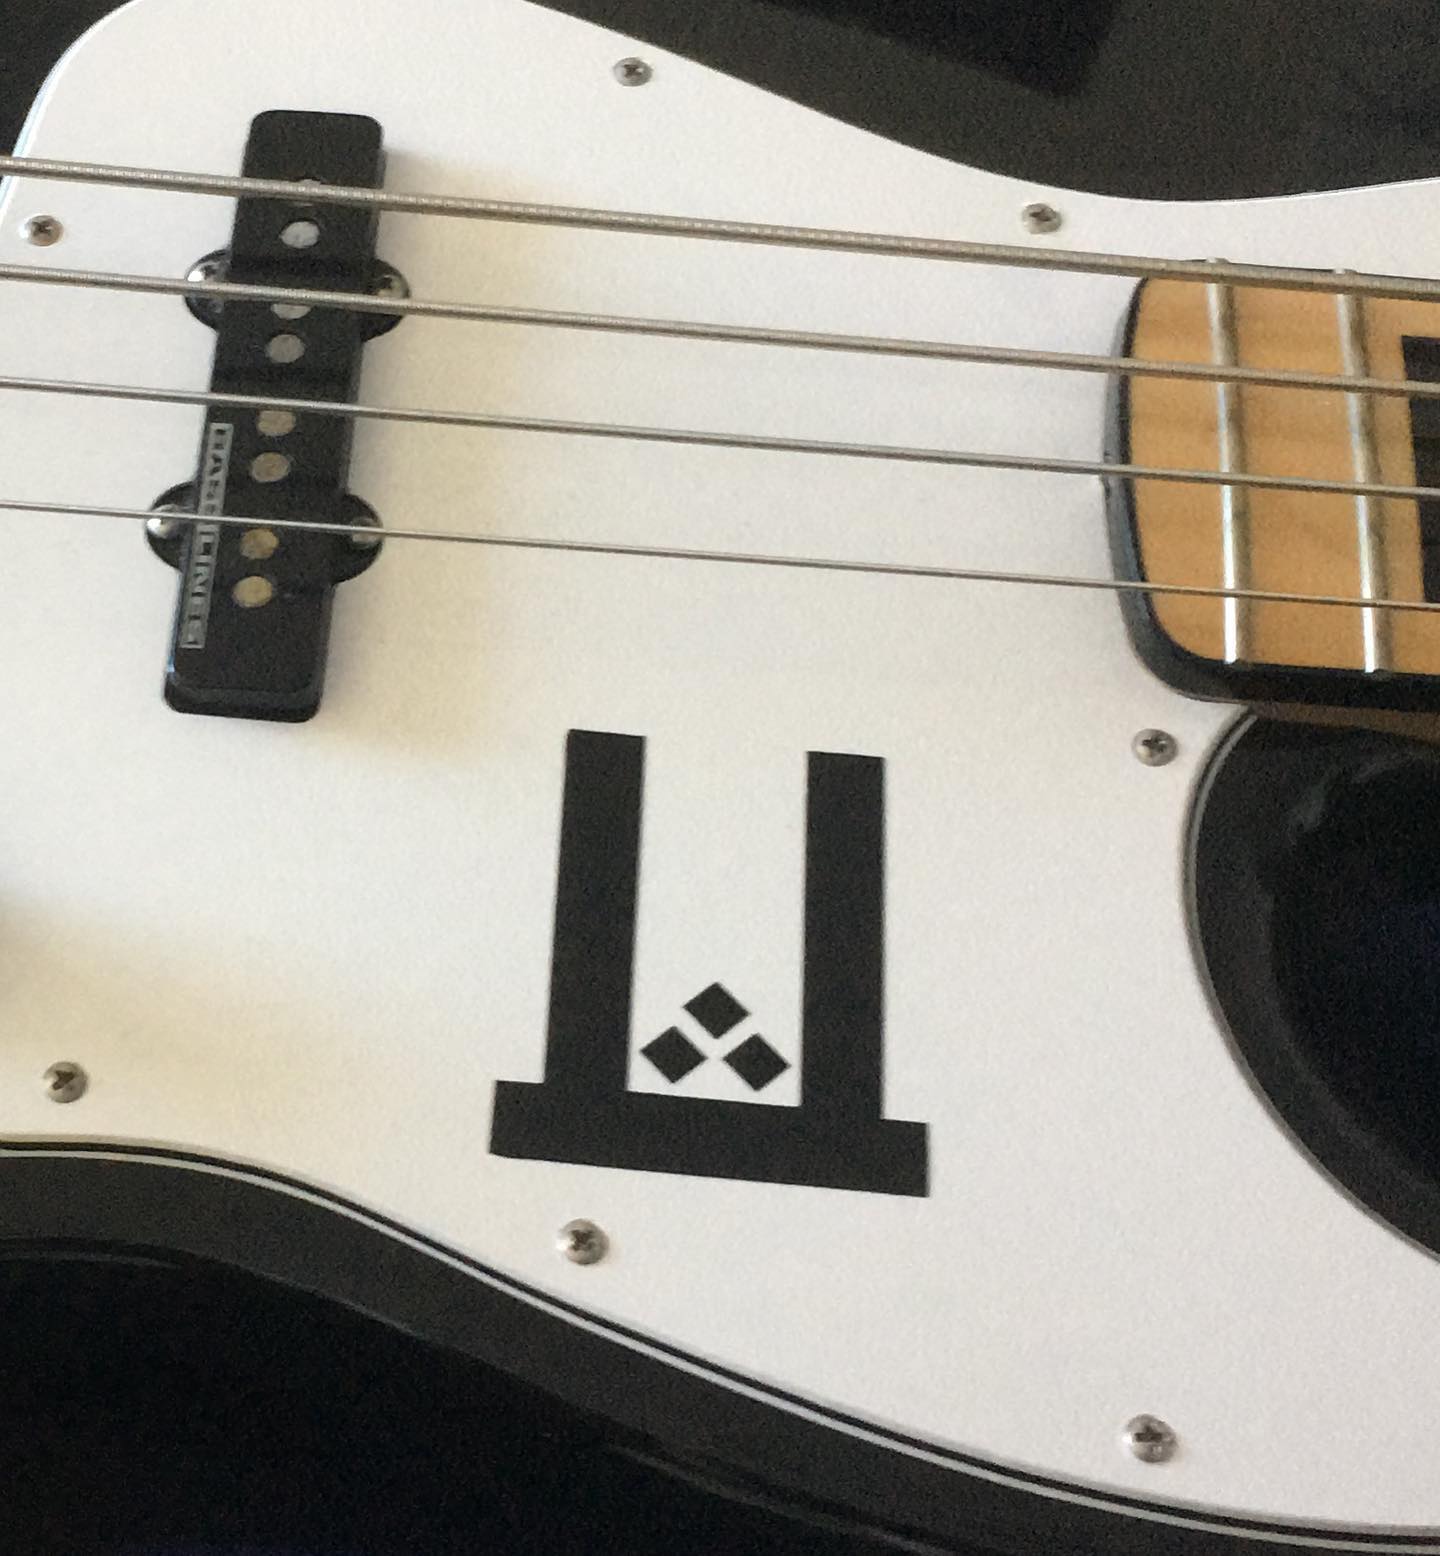 A close up of the Ritual Effect 'U' symbol decal on Christopher's bass guitar